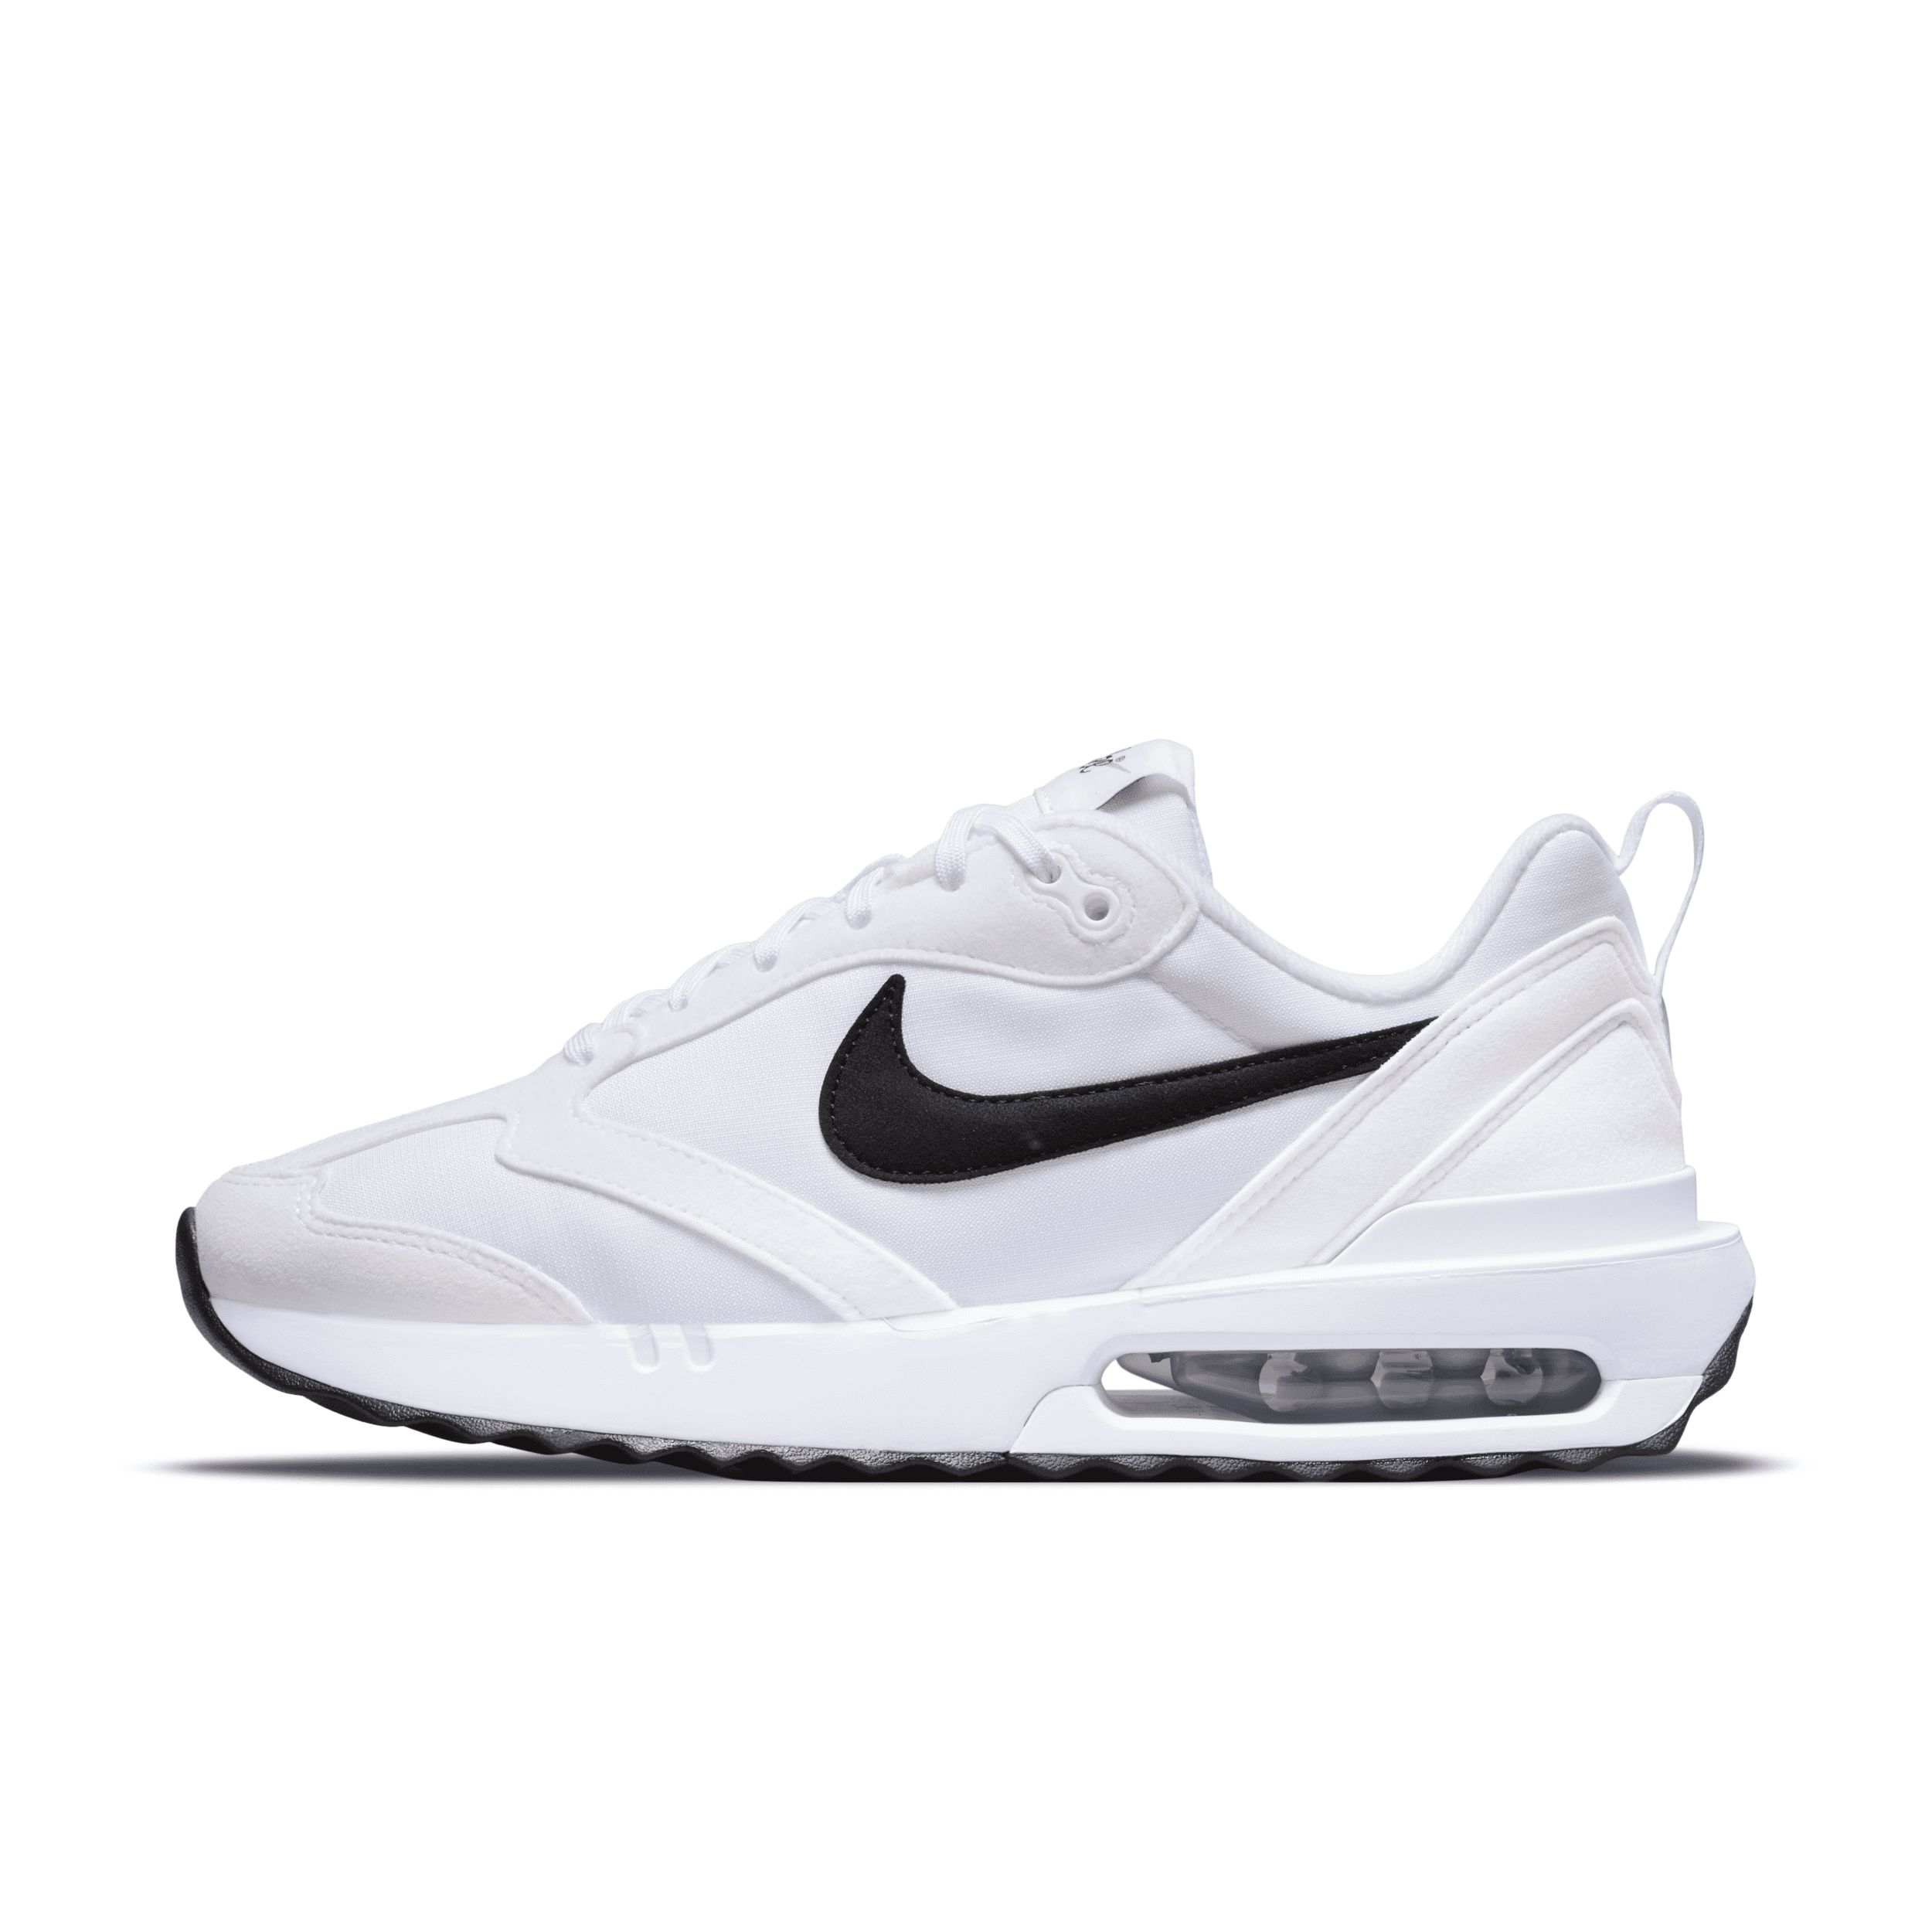 Nike Women's Air Max Dawn Shoes in White, Size: 6 | DH5131-101 | Nike (US)